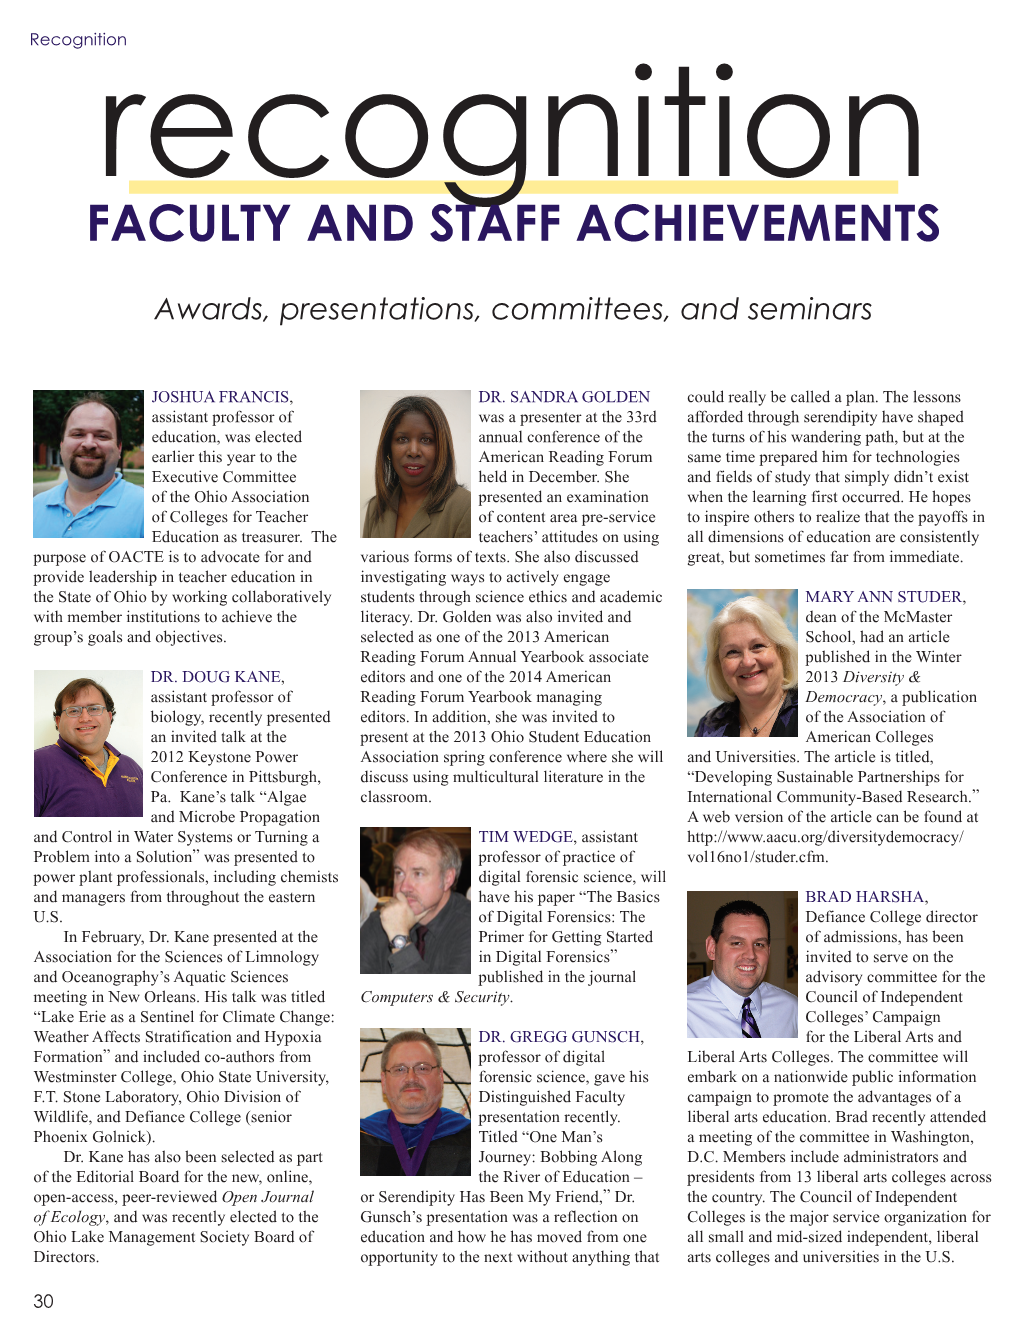 Faculty and Staff Achievements